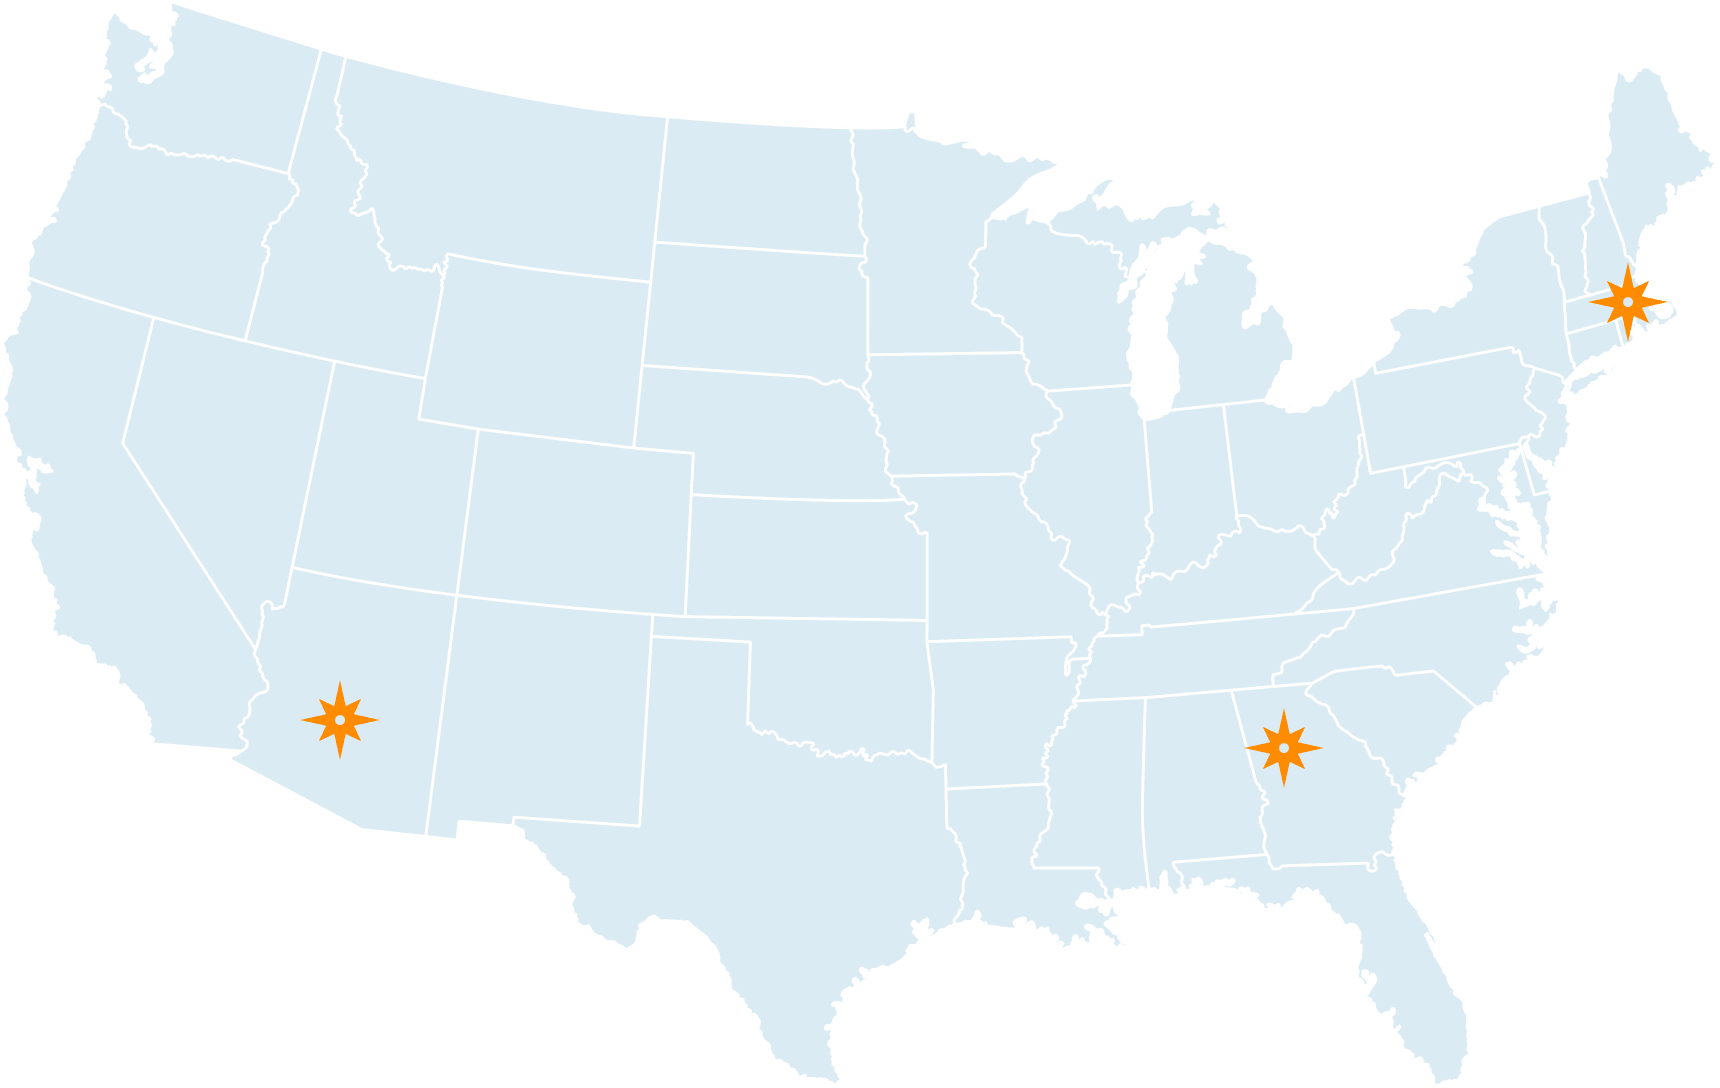 Map of United States with locations of Coretelligent starred